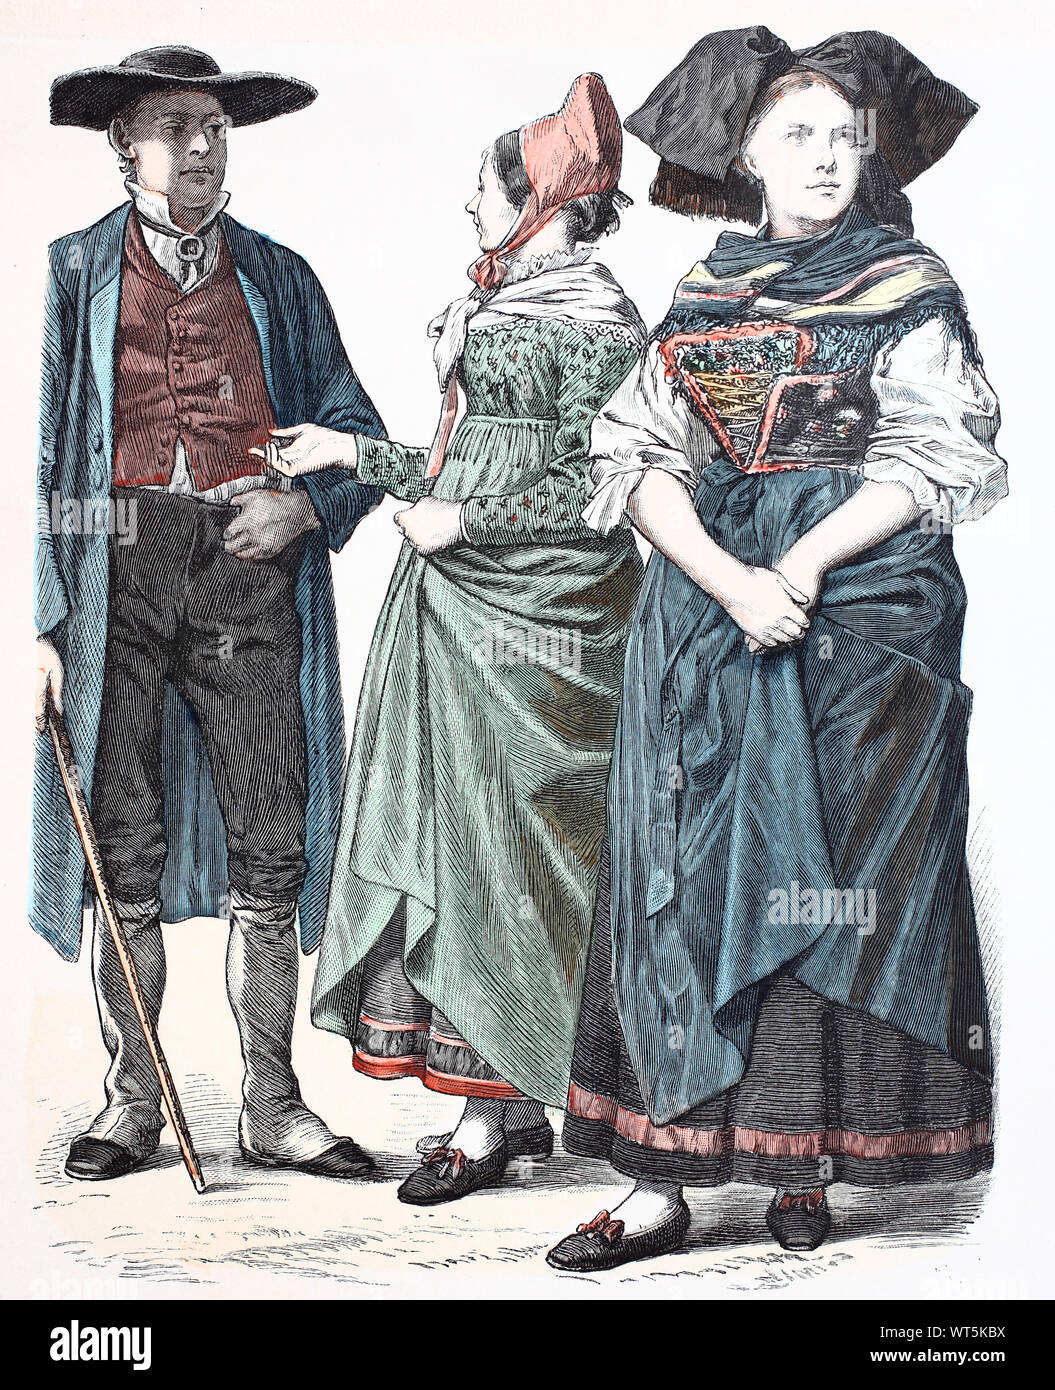 National costume, clothes, history of the costumes, man from upper lake brook, women from Aschbach-Sulz and the castle Umge of Strasbourg, national costumes from Alsace, France, in 1885, Volkstracht, Kleidung, Geschichte der Kostüme, Mann aus Oberseebach, Frauen aus Aschbach-Sulz und der Umgeburg von Straßburg, Trachten aus dem Elsaß, Frankreich, 1885 Stock Photo